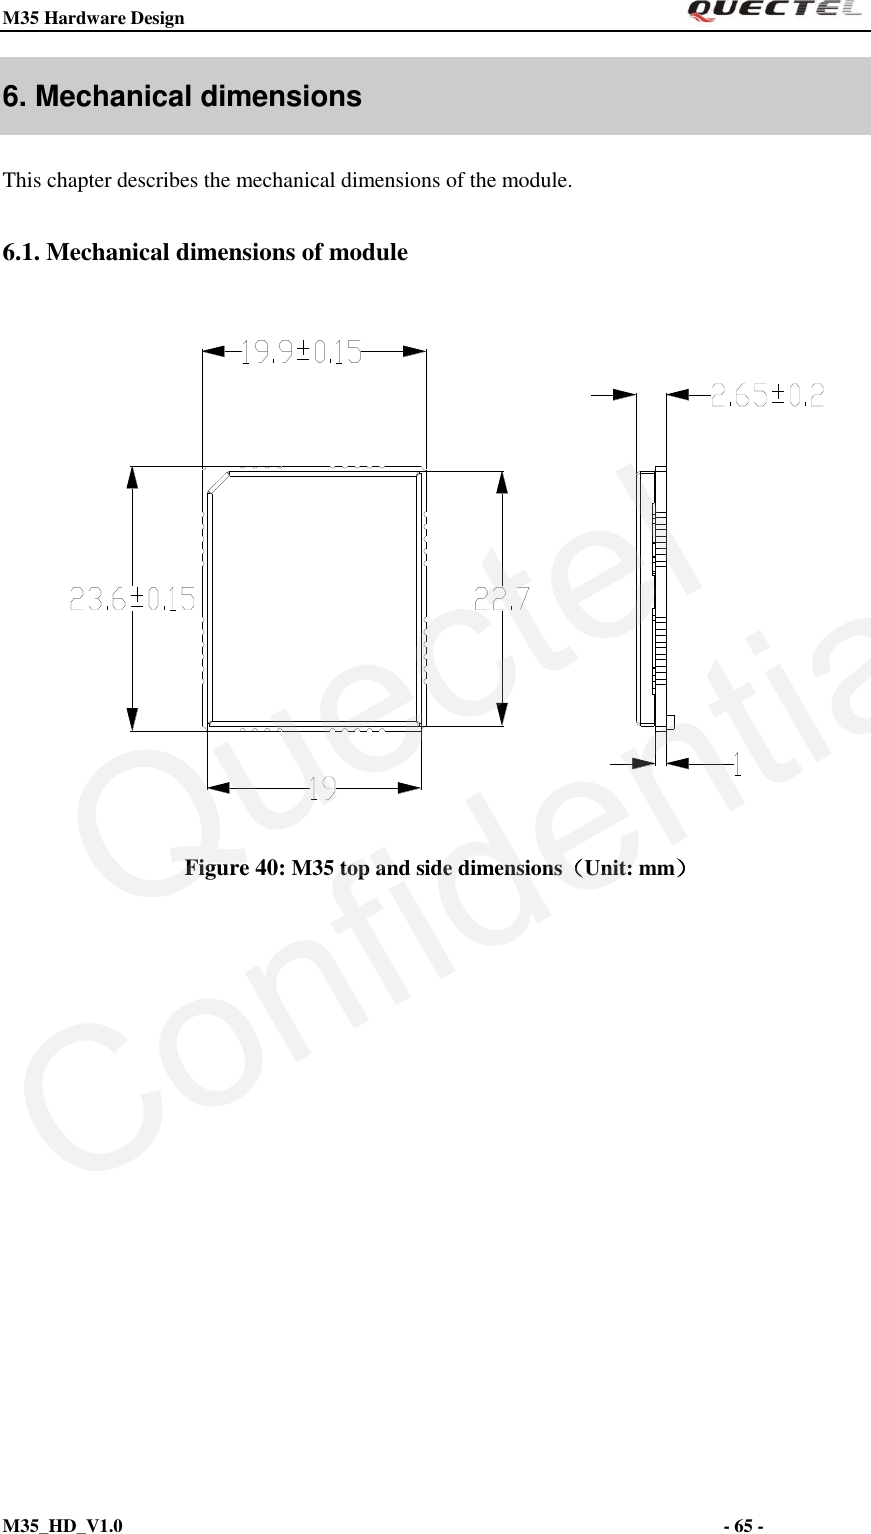 M35 Hardware Design                                                                  M35_HD_V1.0                                                                                                                         - 65 -    6. Mechanical dimensions This chapter describes the mechanical dimensions of the module. 6.1. Mechanical dimensions of module    Figure 40: M35 top and side dimensions（Unit: mm） QuectelConfidential